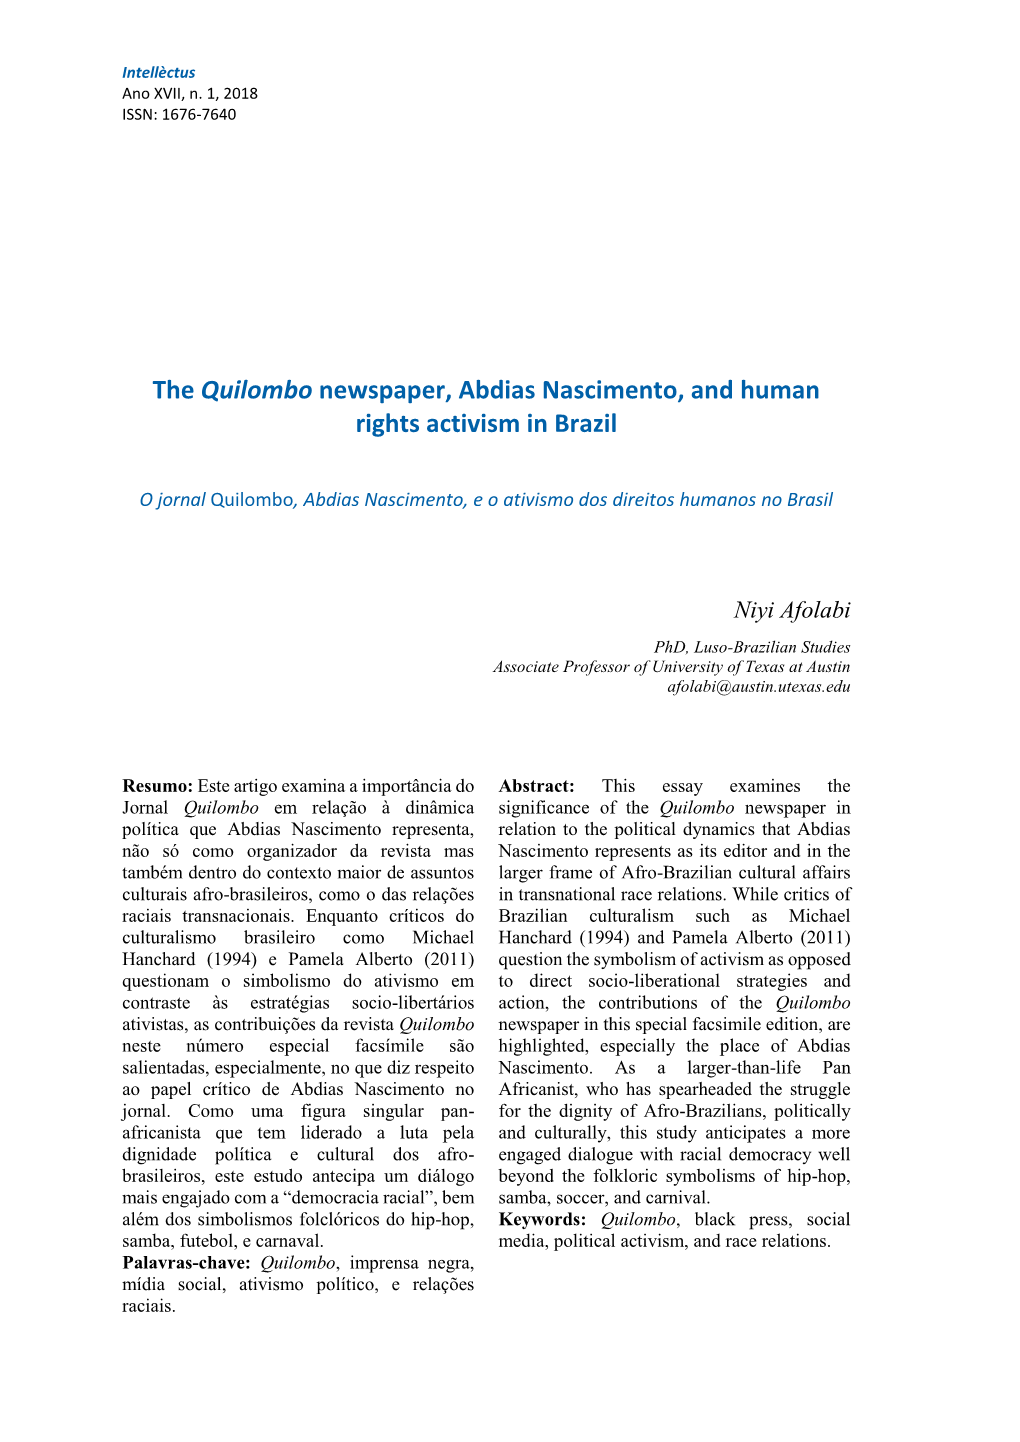 The Quilombo Newspaper, Abdias Nascimento, and Human Rights Activism in Brazil